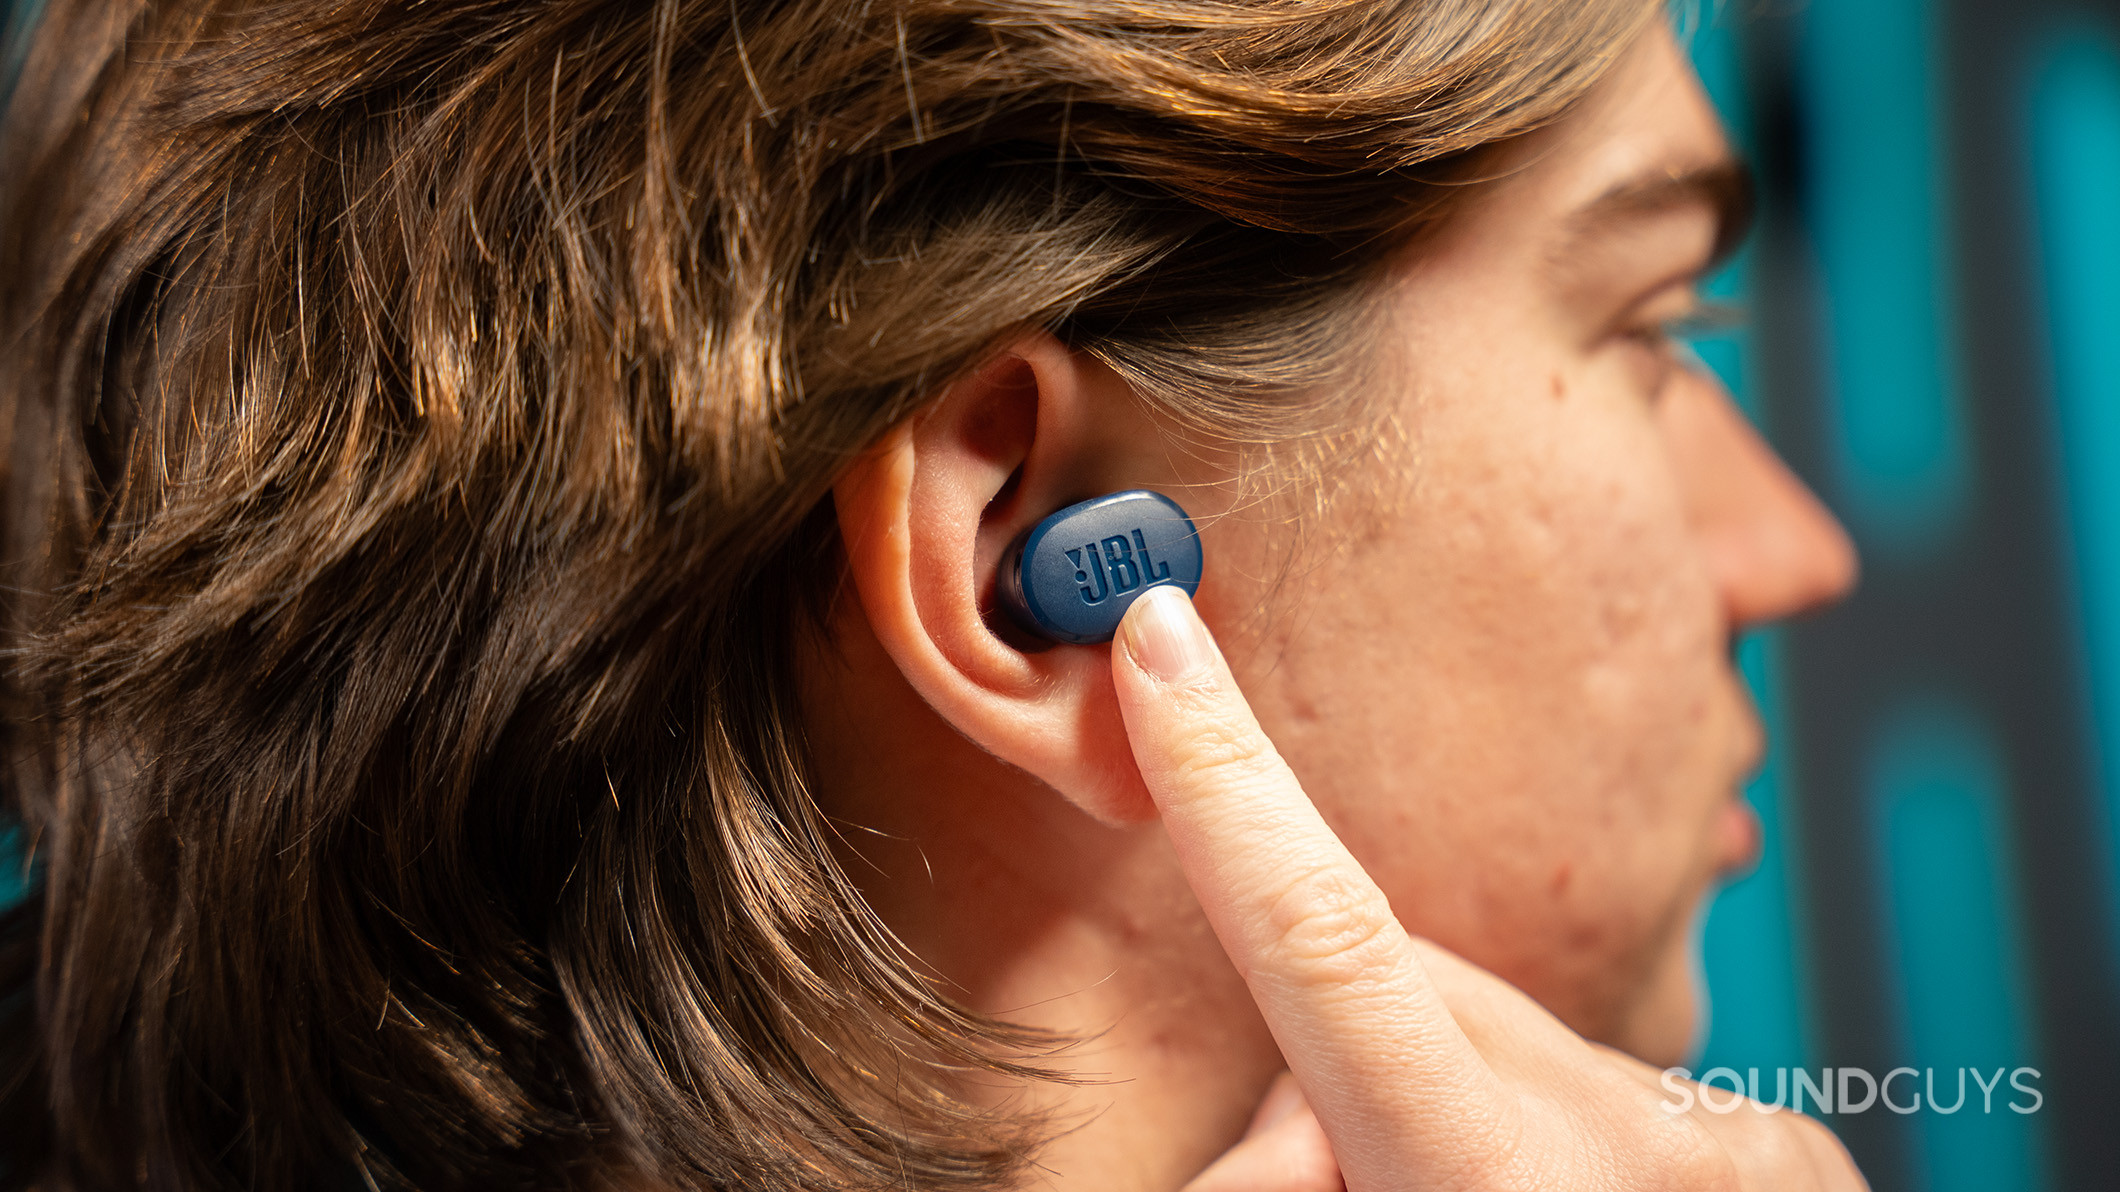 A man pushes the JBL Tune Buds earbud into his ear. 